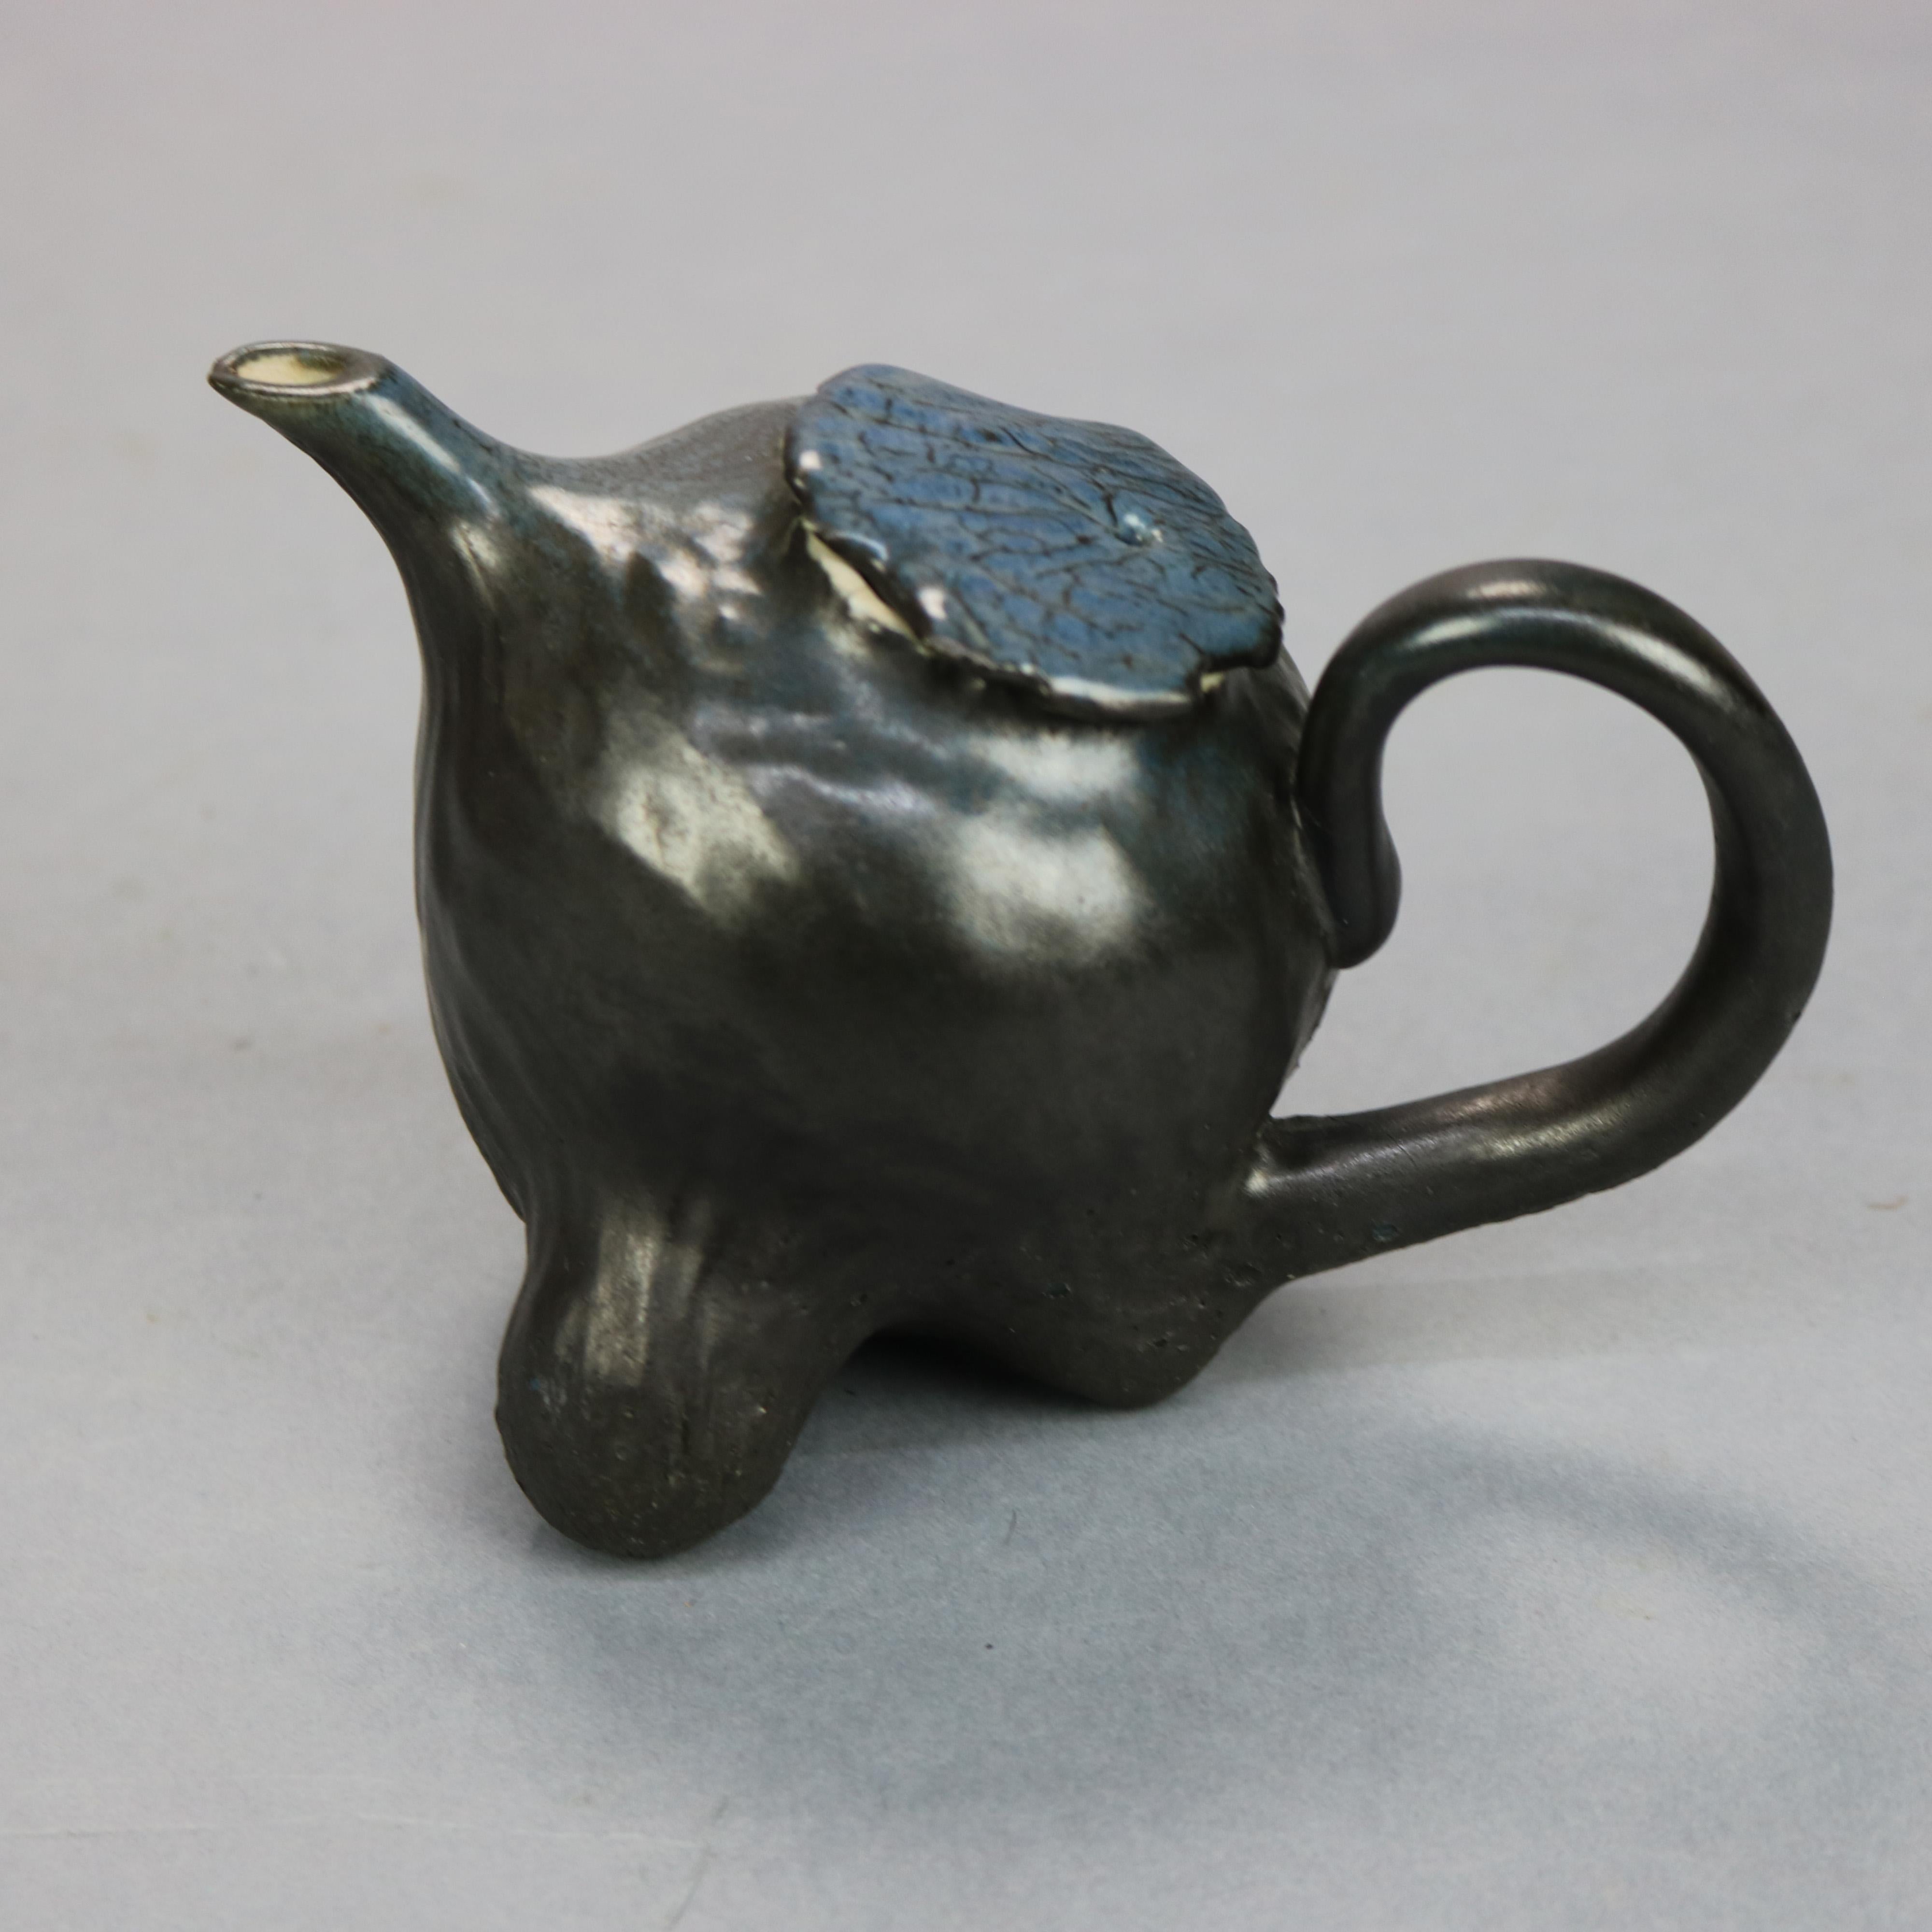 An antique Chinese oriental hand crafted teapot offers hand thrown and glazed pottery lidded teapot seated on carved hardwood base in root form, c1890

Measures: 4.25